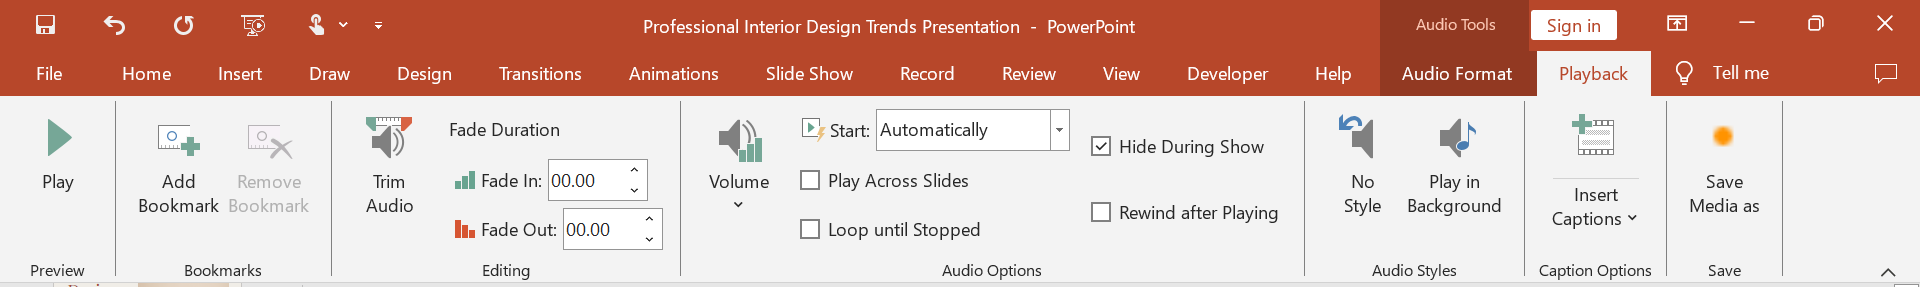 PowerPoint recording playback options